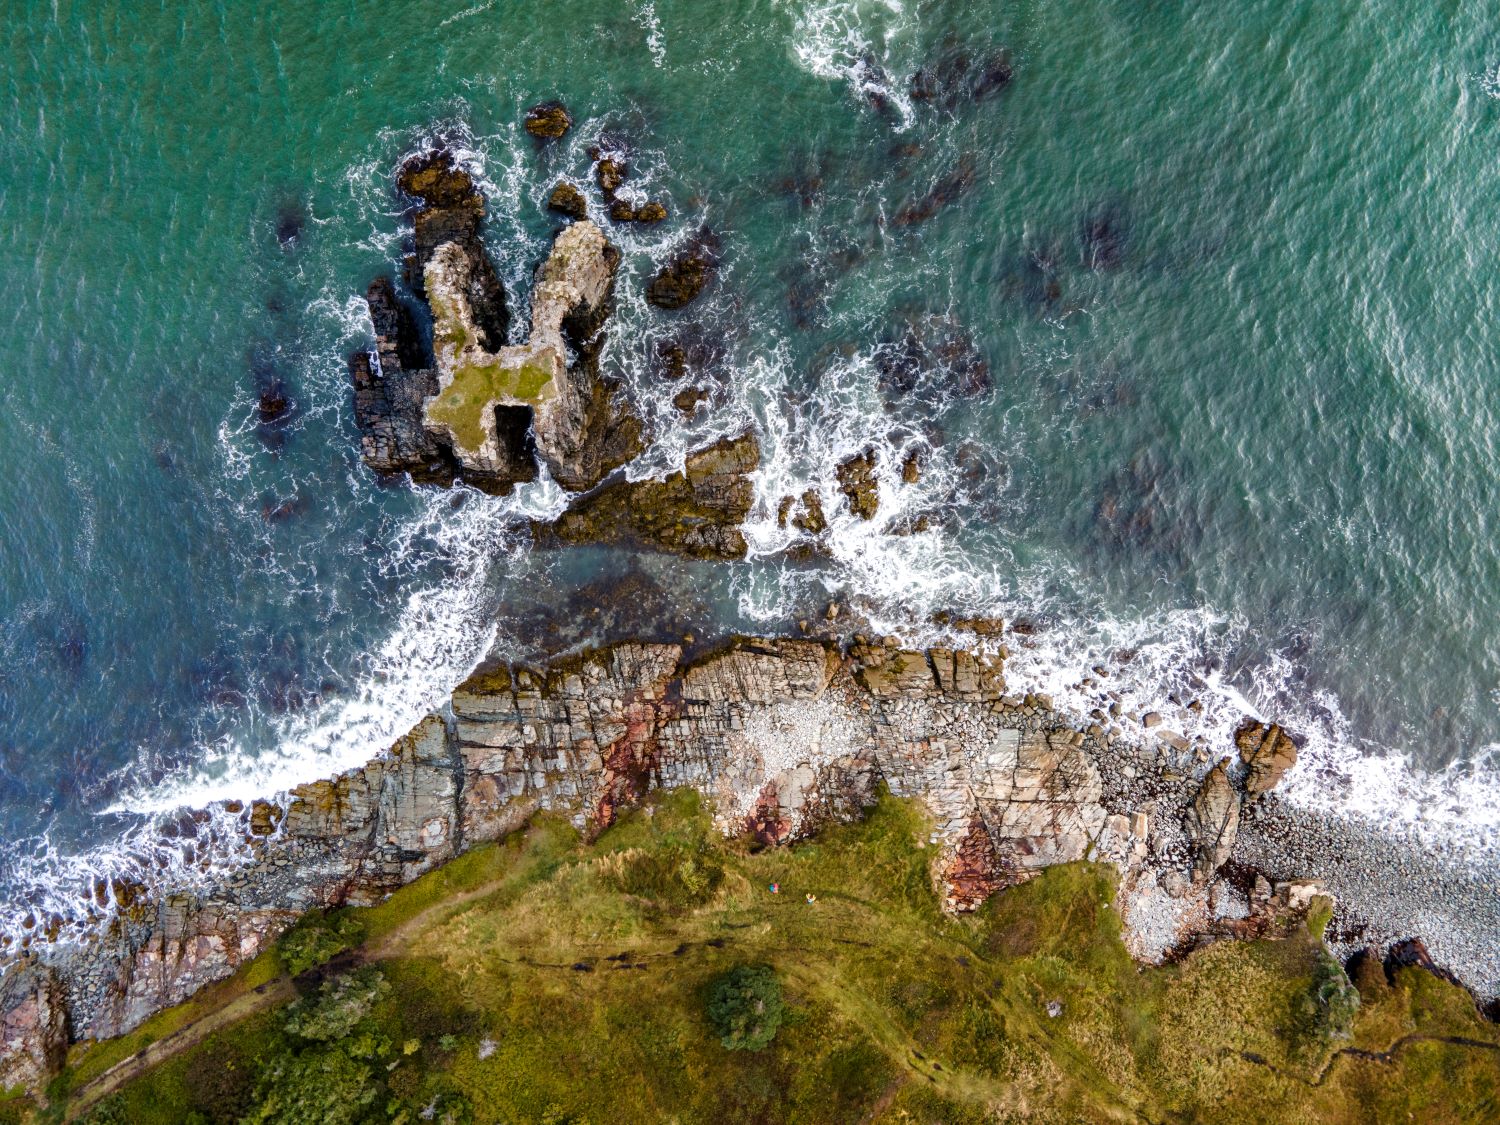 A view down from a drone, showing rocks around an area of coastline